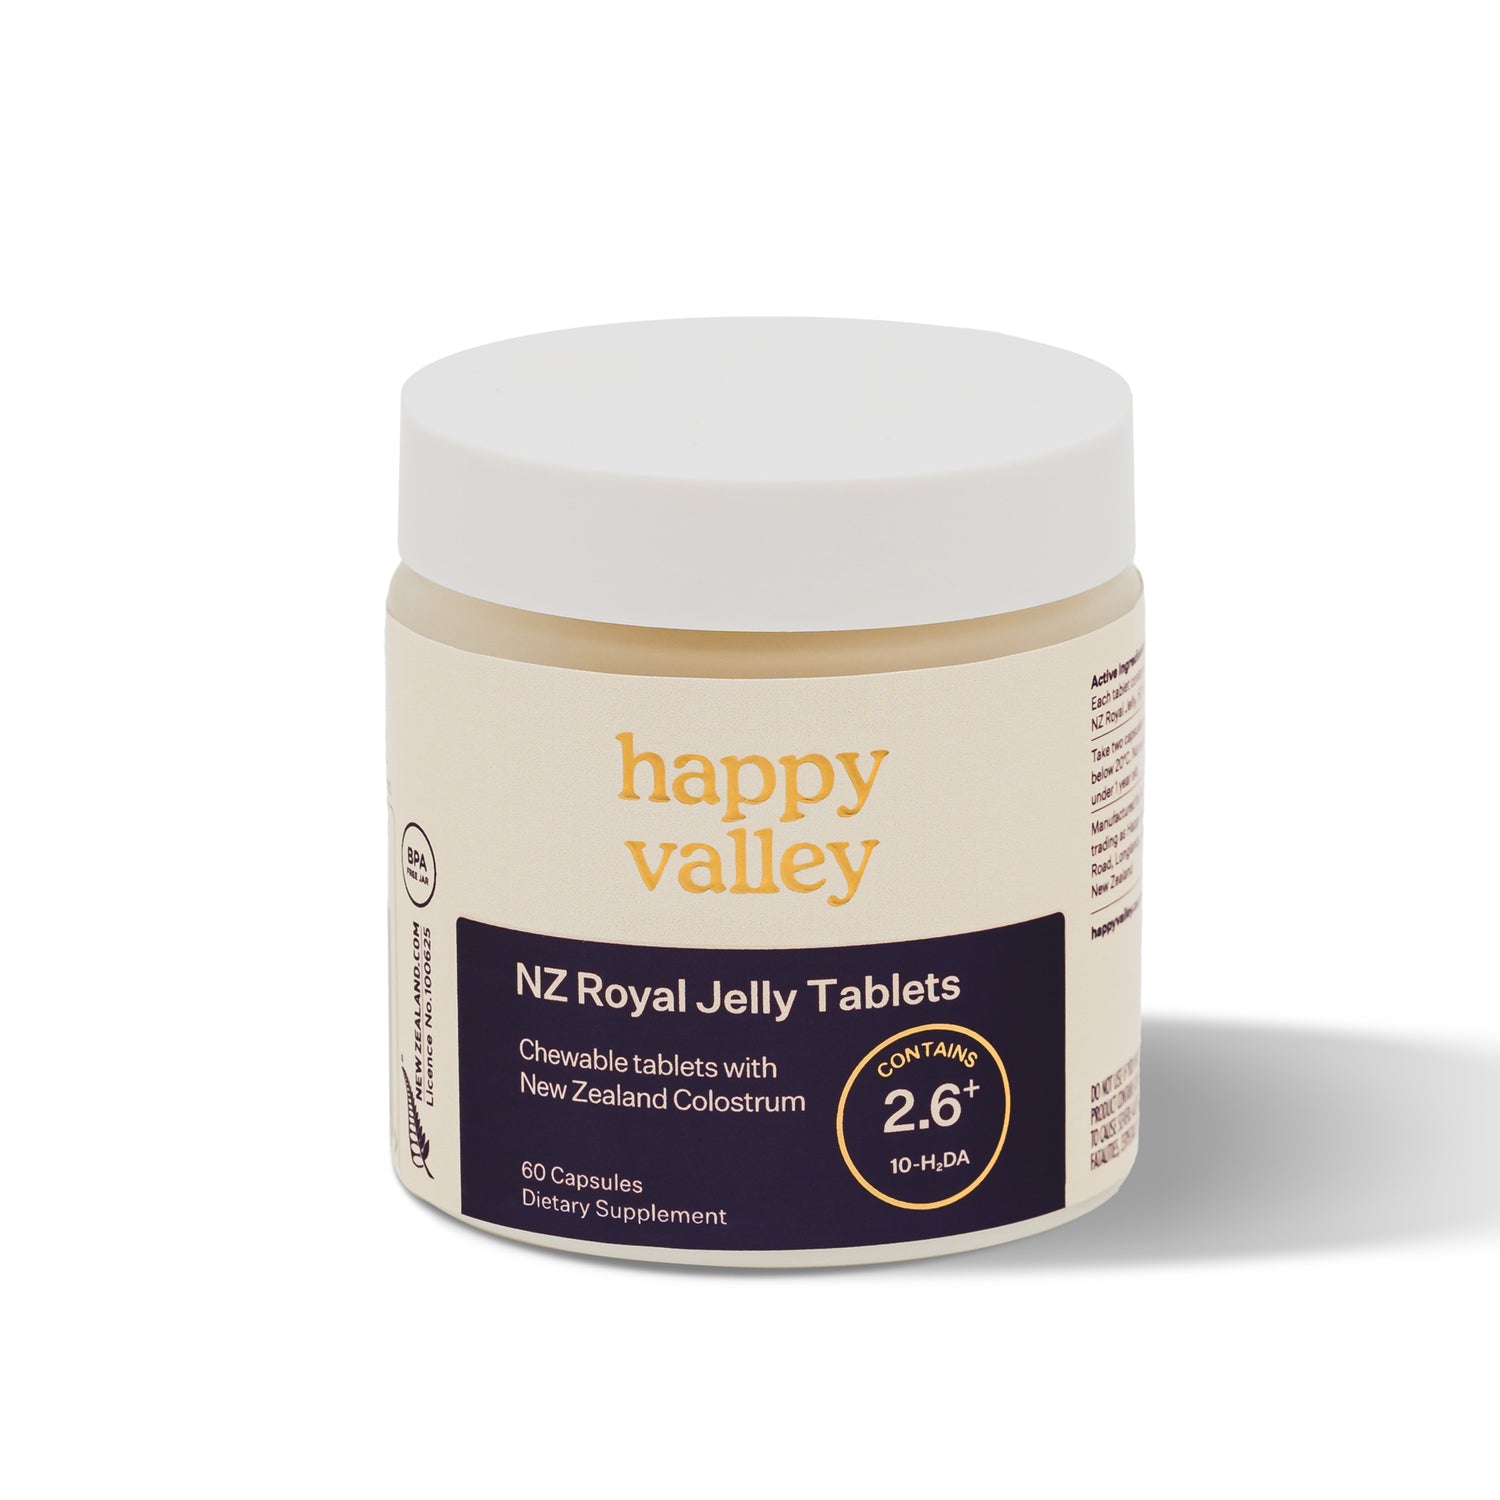 NZ Royal Jelly Chewable Tablets